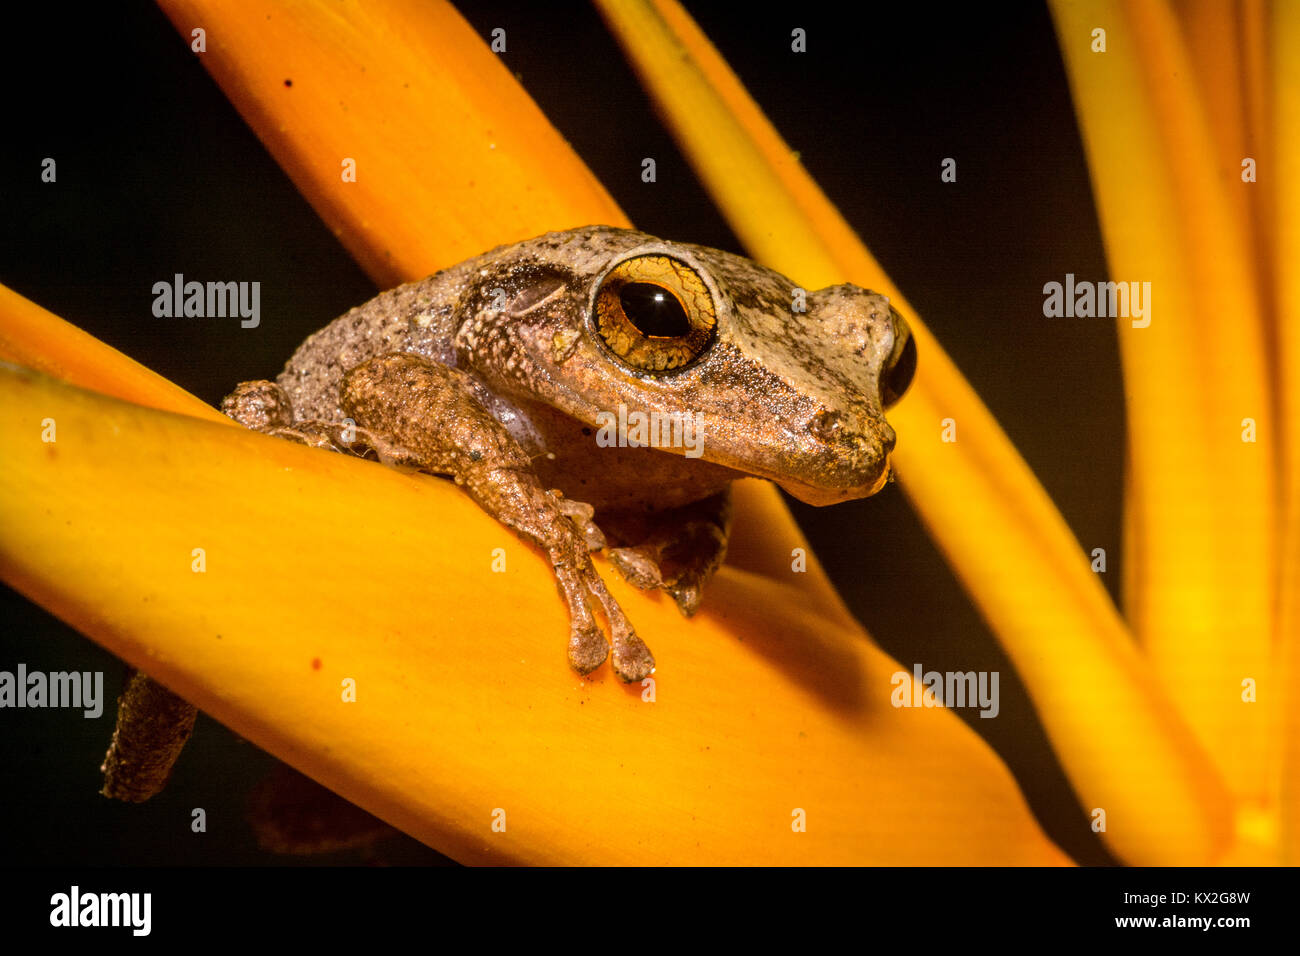 Coquí frogs in their natural enviroment. Stock Photo